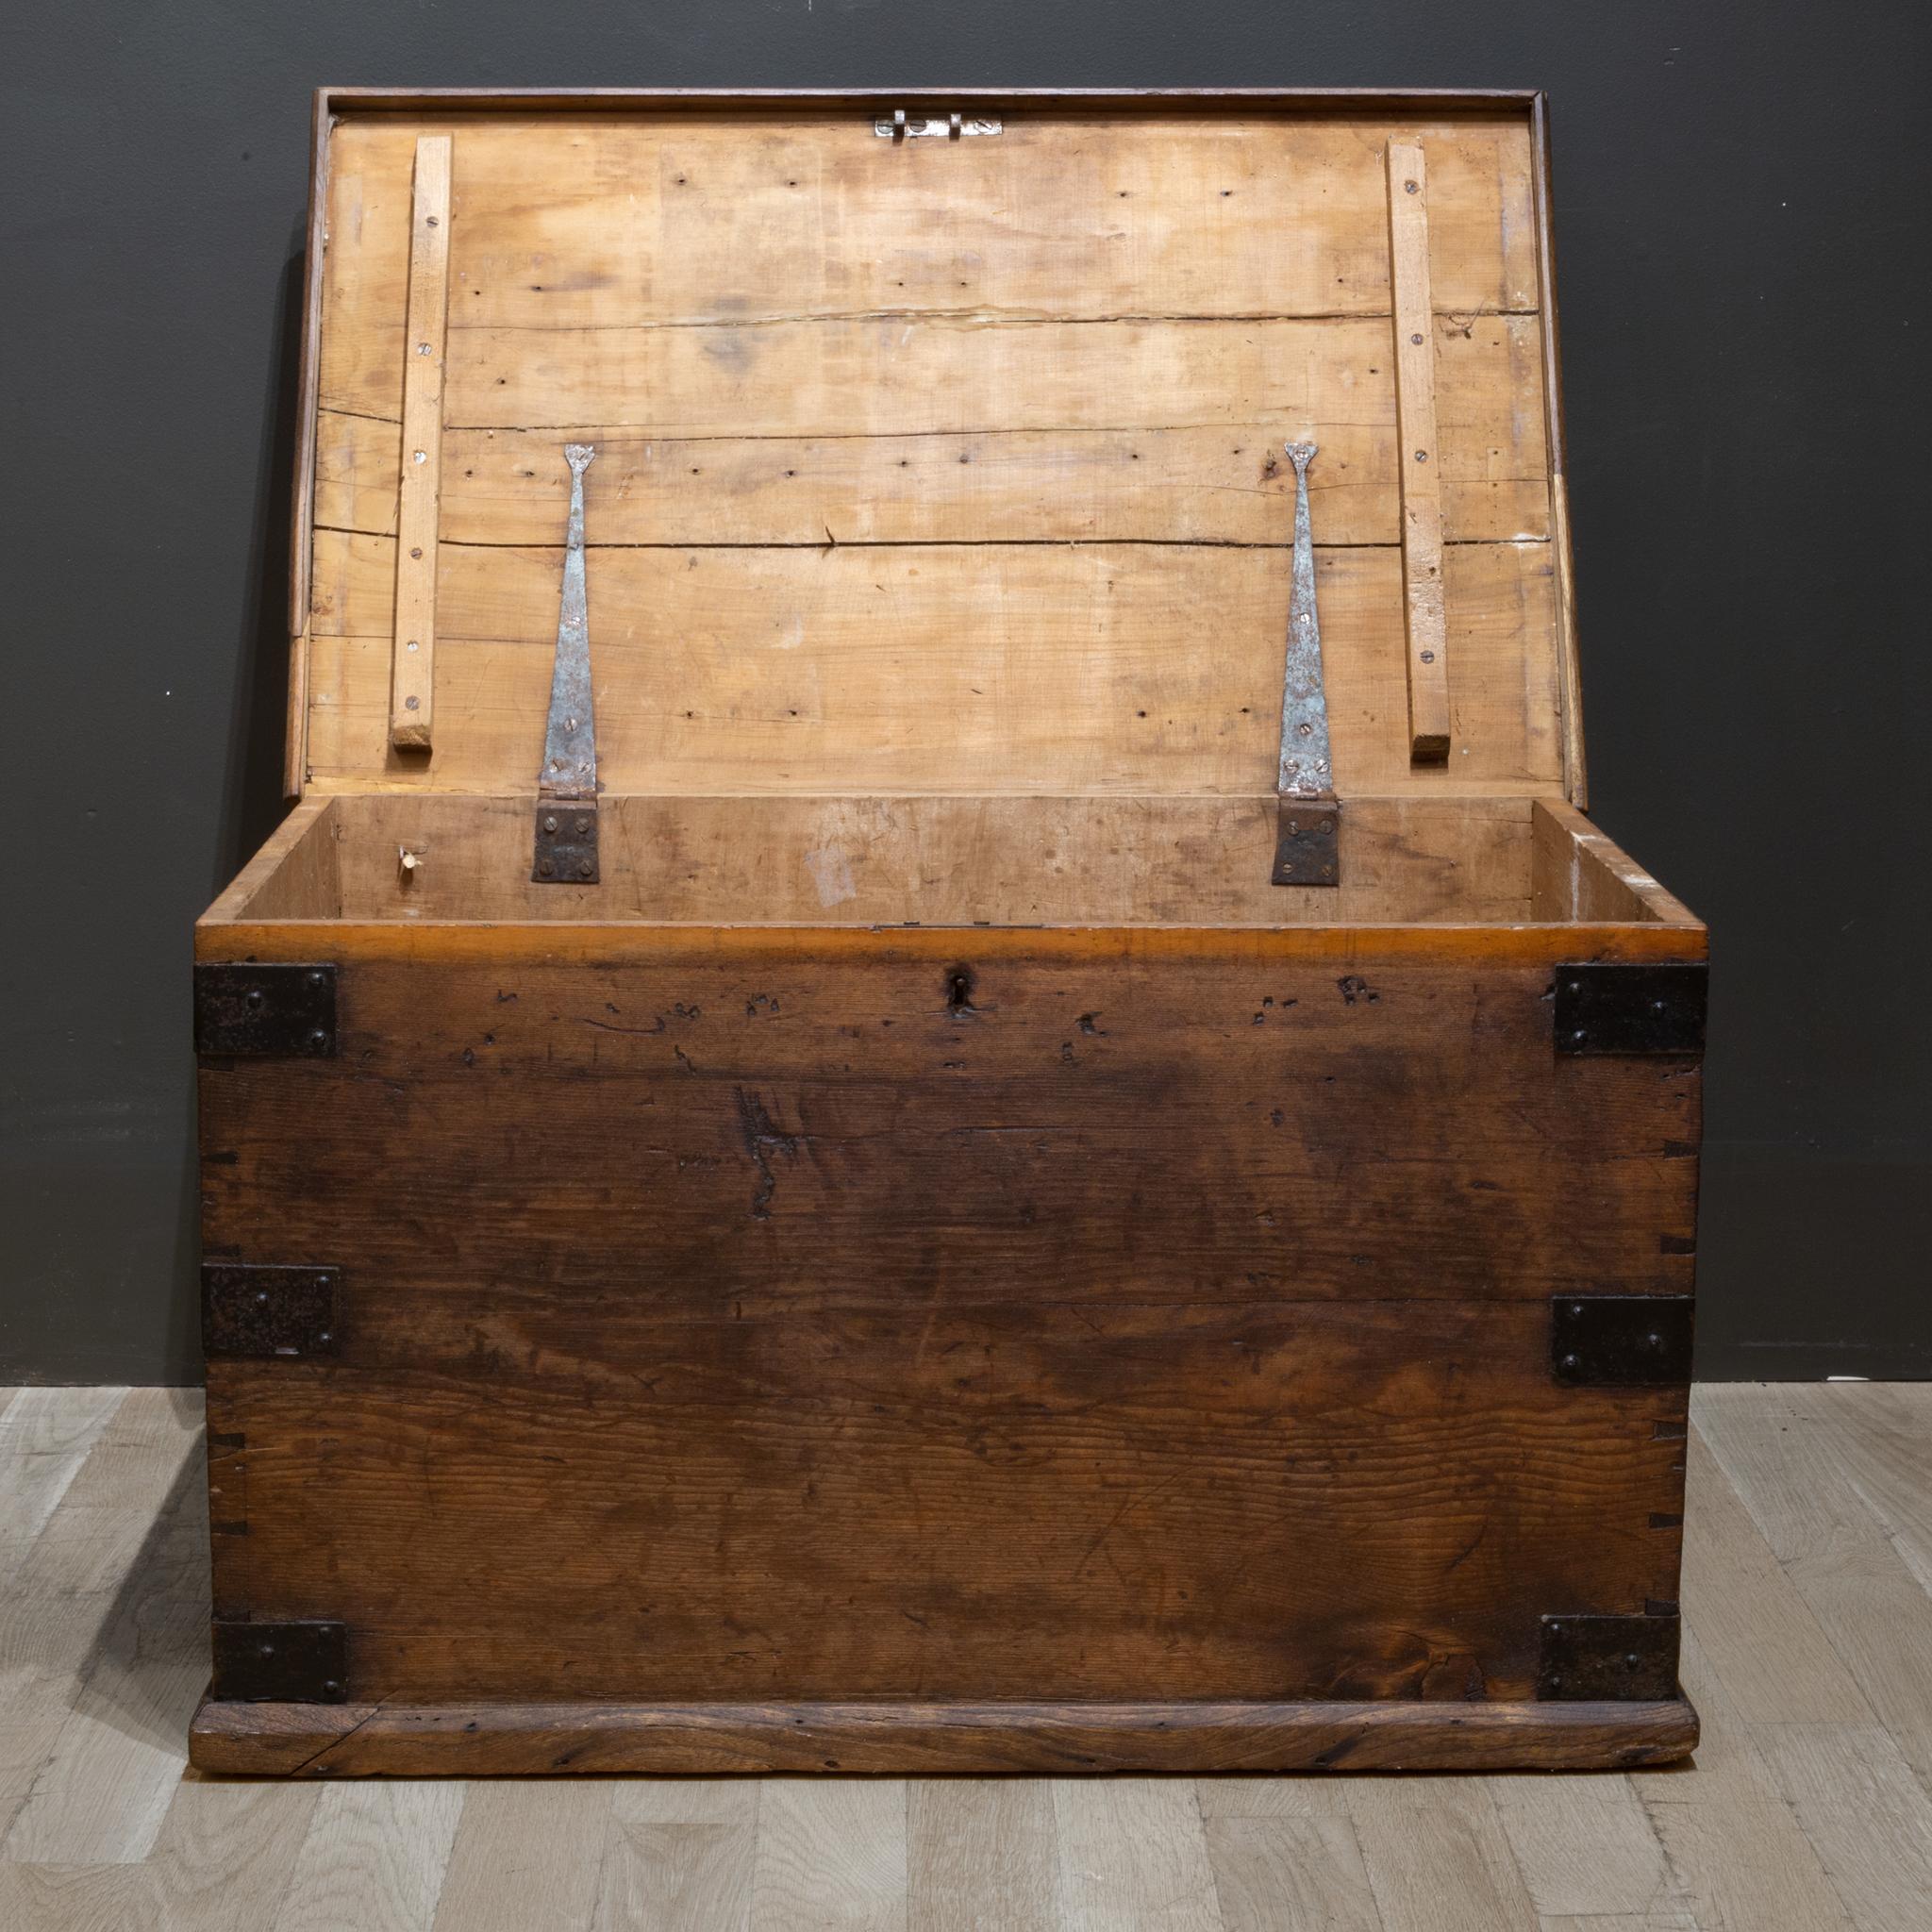 19th Century Late 19th / Early 20th C. Blanket Chest, c.1880-1920